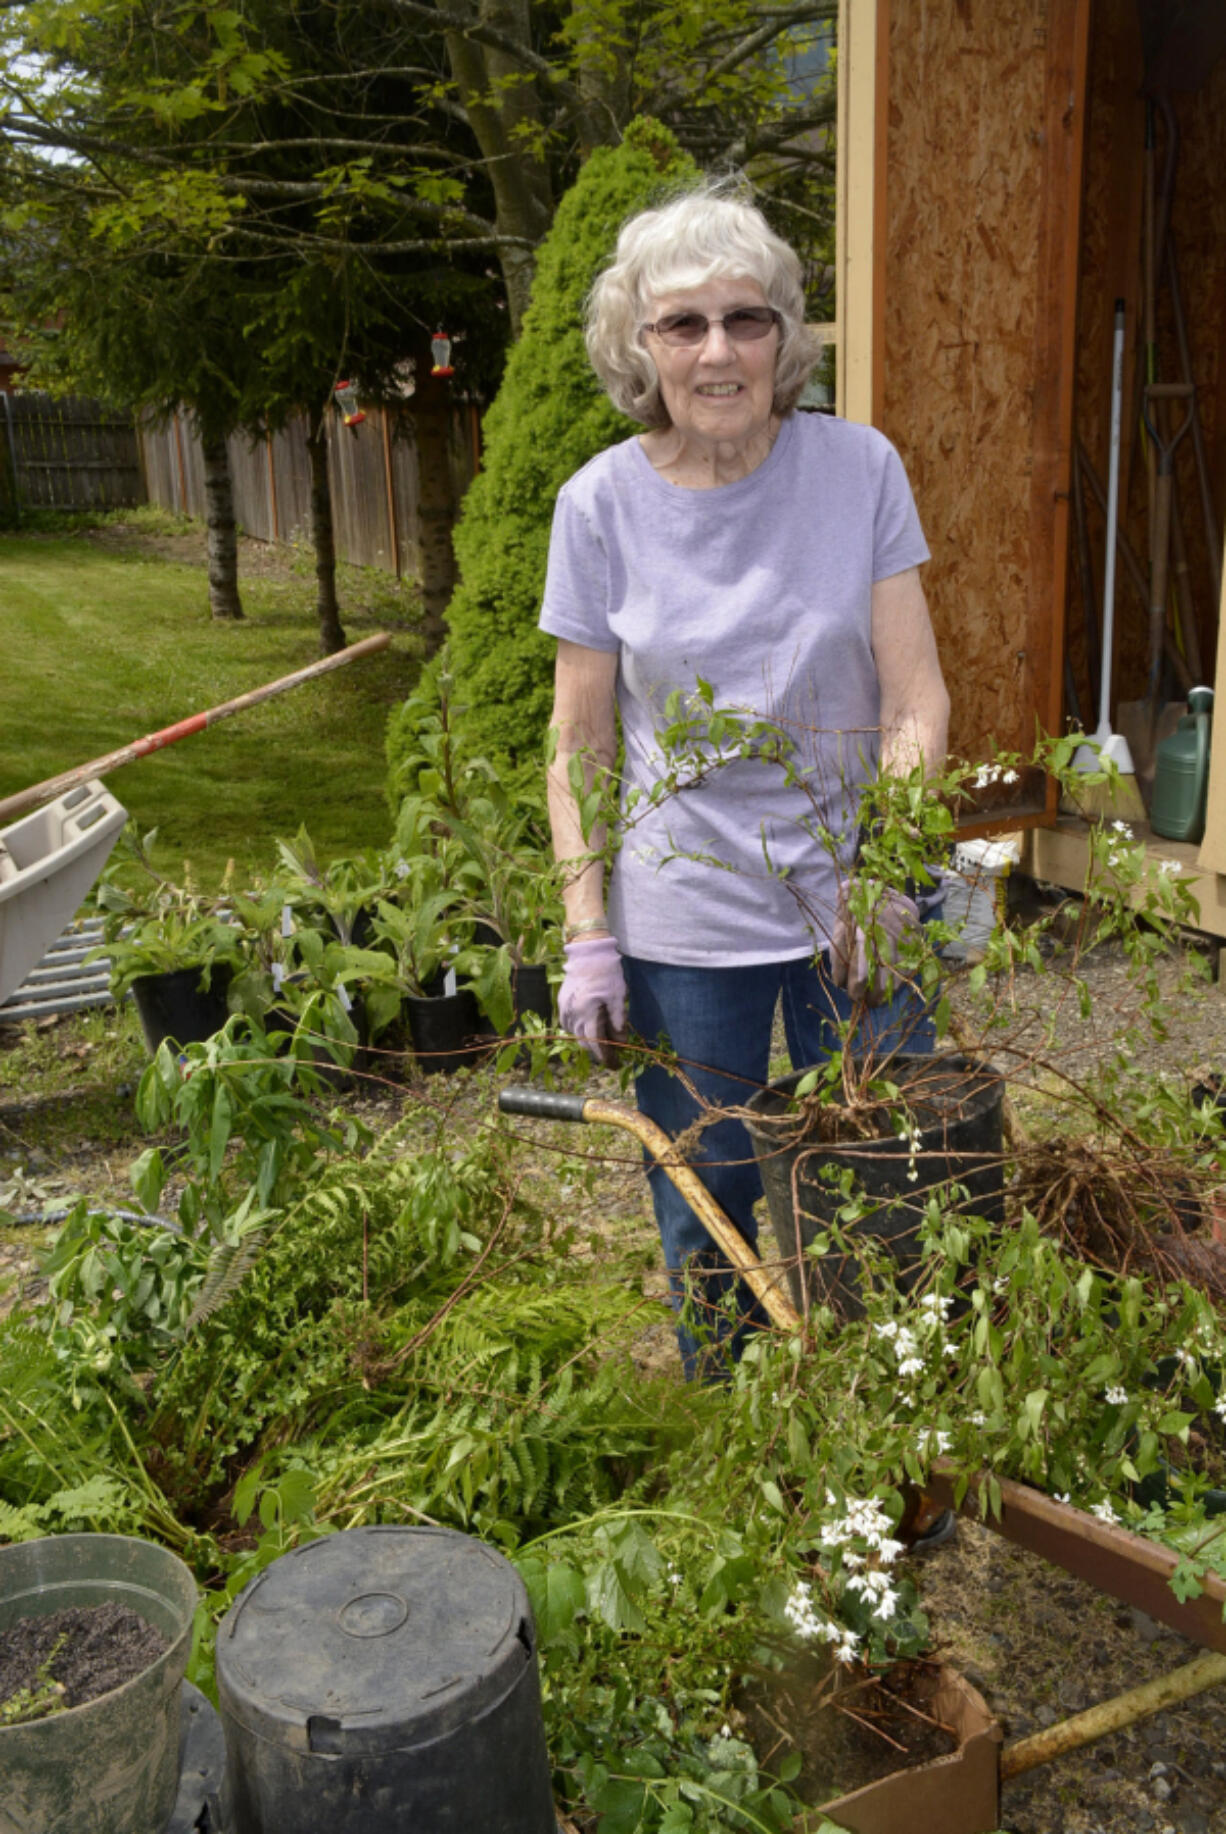 The annual plant fair hosted by the Camas-Washougal Historical Society will be from 10 a.m.-3 p.m. May 14 and June 12 at the Two Rivers Heritage Museum, 1 Durgan St., Washougal.